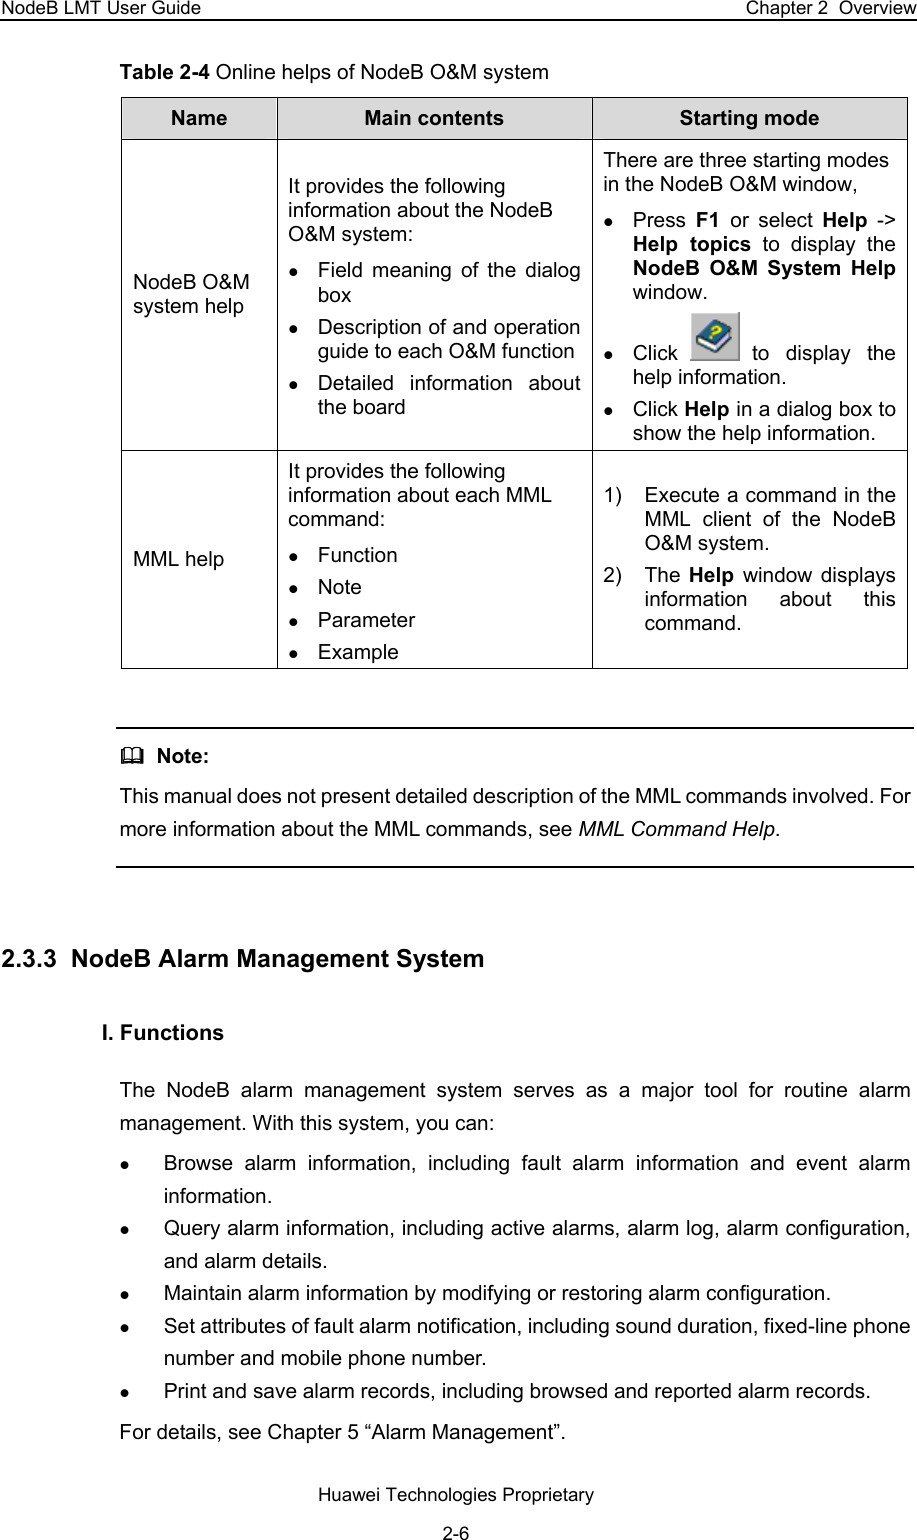 NodeB LMT User Guide  Chapter 2  Overview Table 2-4 Online helps of NodeB O&amp;M system  Name   Main contents  Starting mode NodeB O&amp;M system help It provides the following information about the NodeB O&amp;M system:  z Field meaning of the dialog box z Description of and operation guide to each O&amp;M functionz Detailed information about the board There are three starting modes in the NodeB O&amp;M window,  z Press  F1  or select Help -&gt; Help topics to display the NodeB O&amp;M System Help window.  z Click   to display the help information. z Click Help in a dialog box to show the help information. MML help  It provides the following information about each MML command:  z Function  z Note z Parameter z Example 1)  Execute a command in the MML client of the NodeB O&amp;M system. 2) The Help  window displays information about this command.    Note:  This manual does not present detailed description of the MML commands involved. For more information about the MML commands, see MML Command Help.  2.3.3  NodeB Alarm Management System I. Functions The NodeB alarm management system serves as a major tool for routine alarm management. With this system, you can:  z Browse alarm information, including fault alarm information and event alarm information. z Query alarm information, including active alarms, alarm log, alarm configuration, and alarm details.  z Maintain alarm information by modifying or restoring alarm configuration. z Set attributes of fault alarm notification, including sound duration, fixed-line phone number and mobile phone number. z Print and save alarm records, including browsed and reported alarm records. For details, see Chapter 5 “Alarm Management”.  Huawei Technologies Proprietary 2-6 